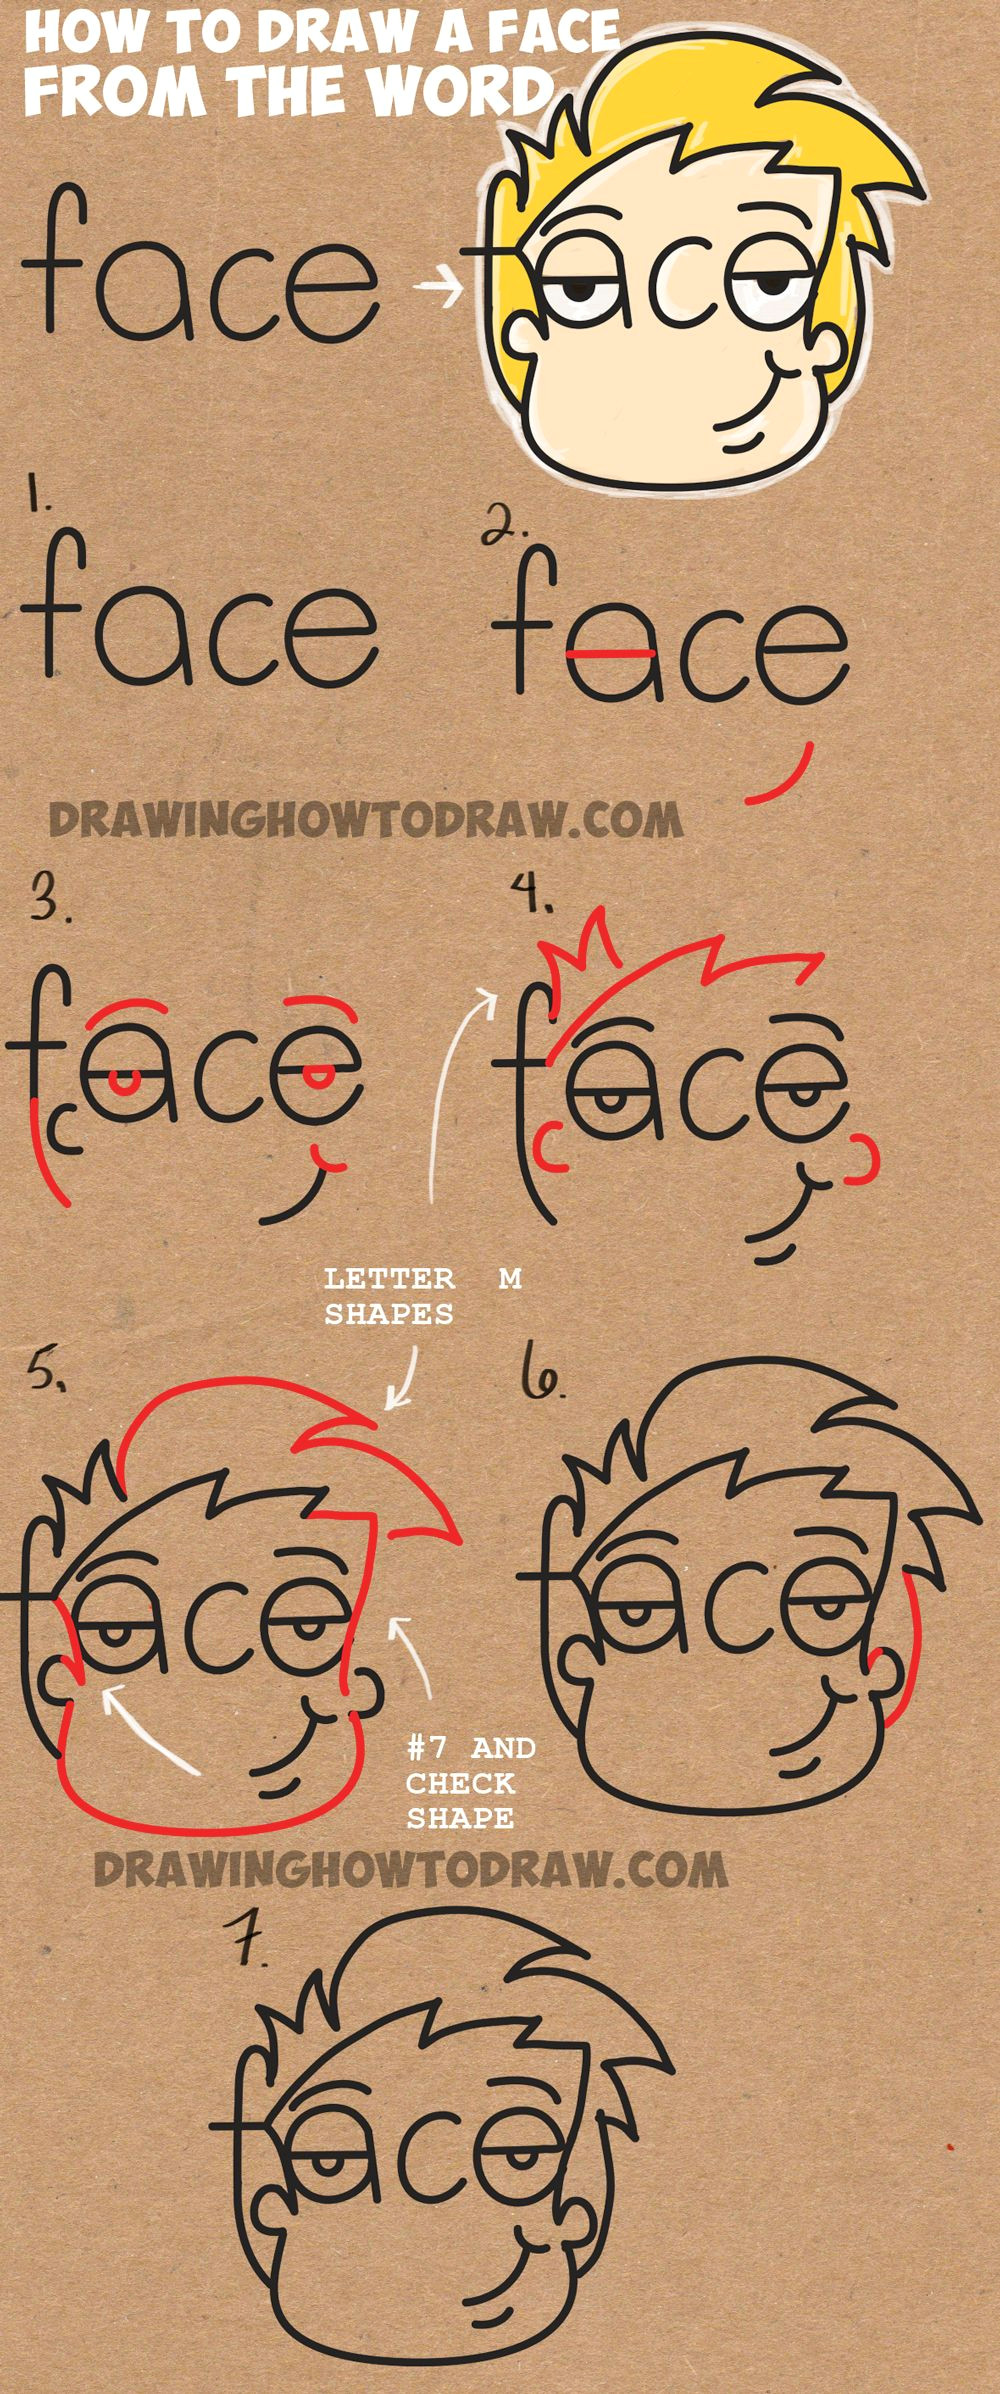 Face Easy Drawing How to Draw Cartoon Faces From the Word Face Easy Step by